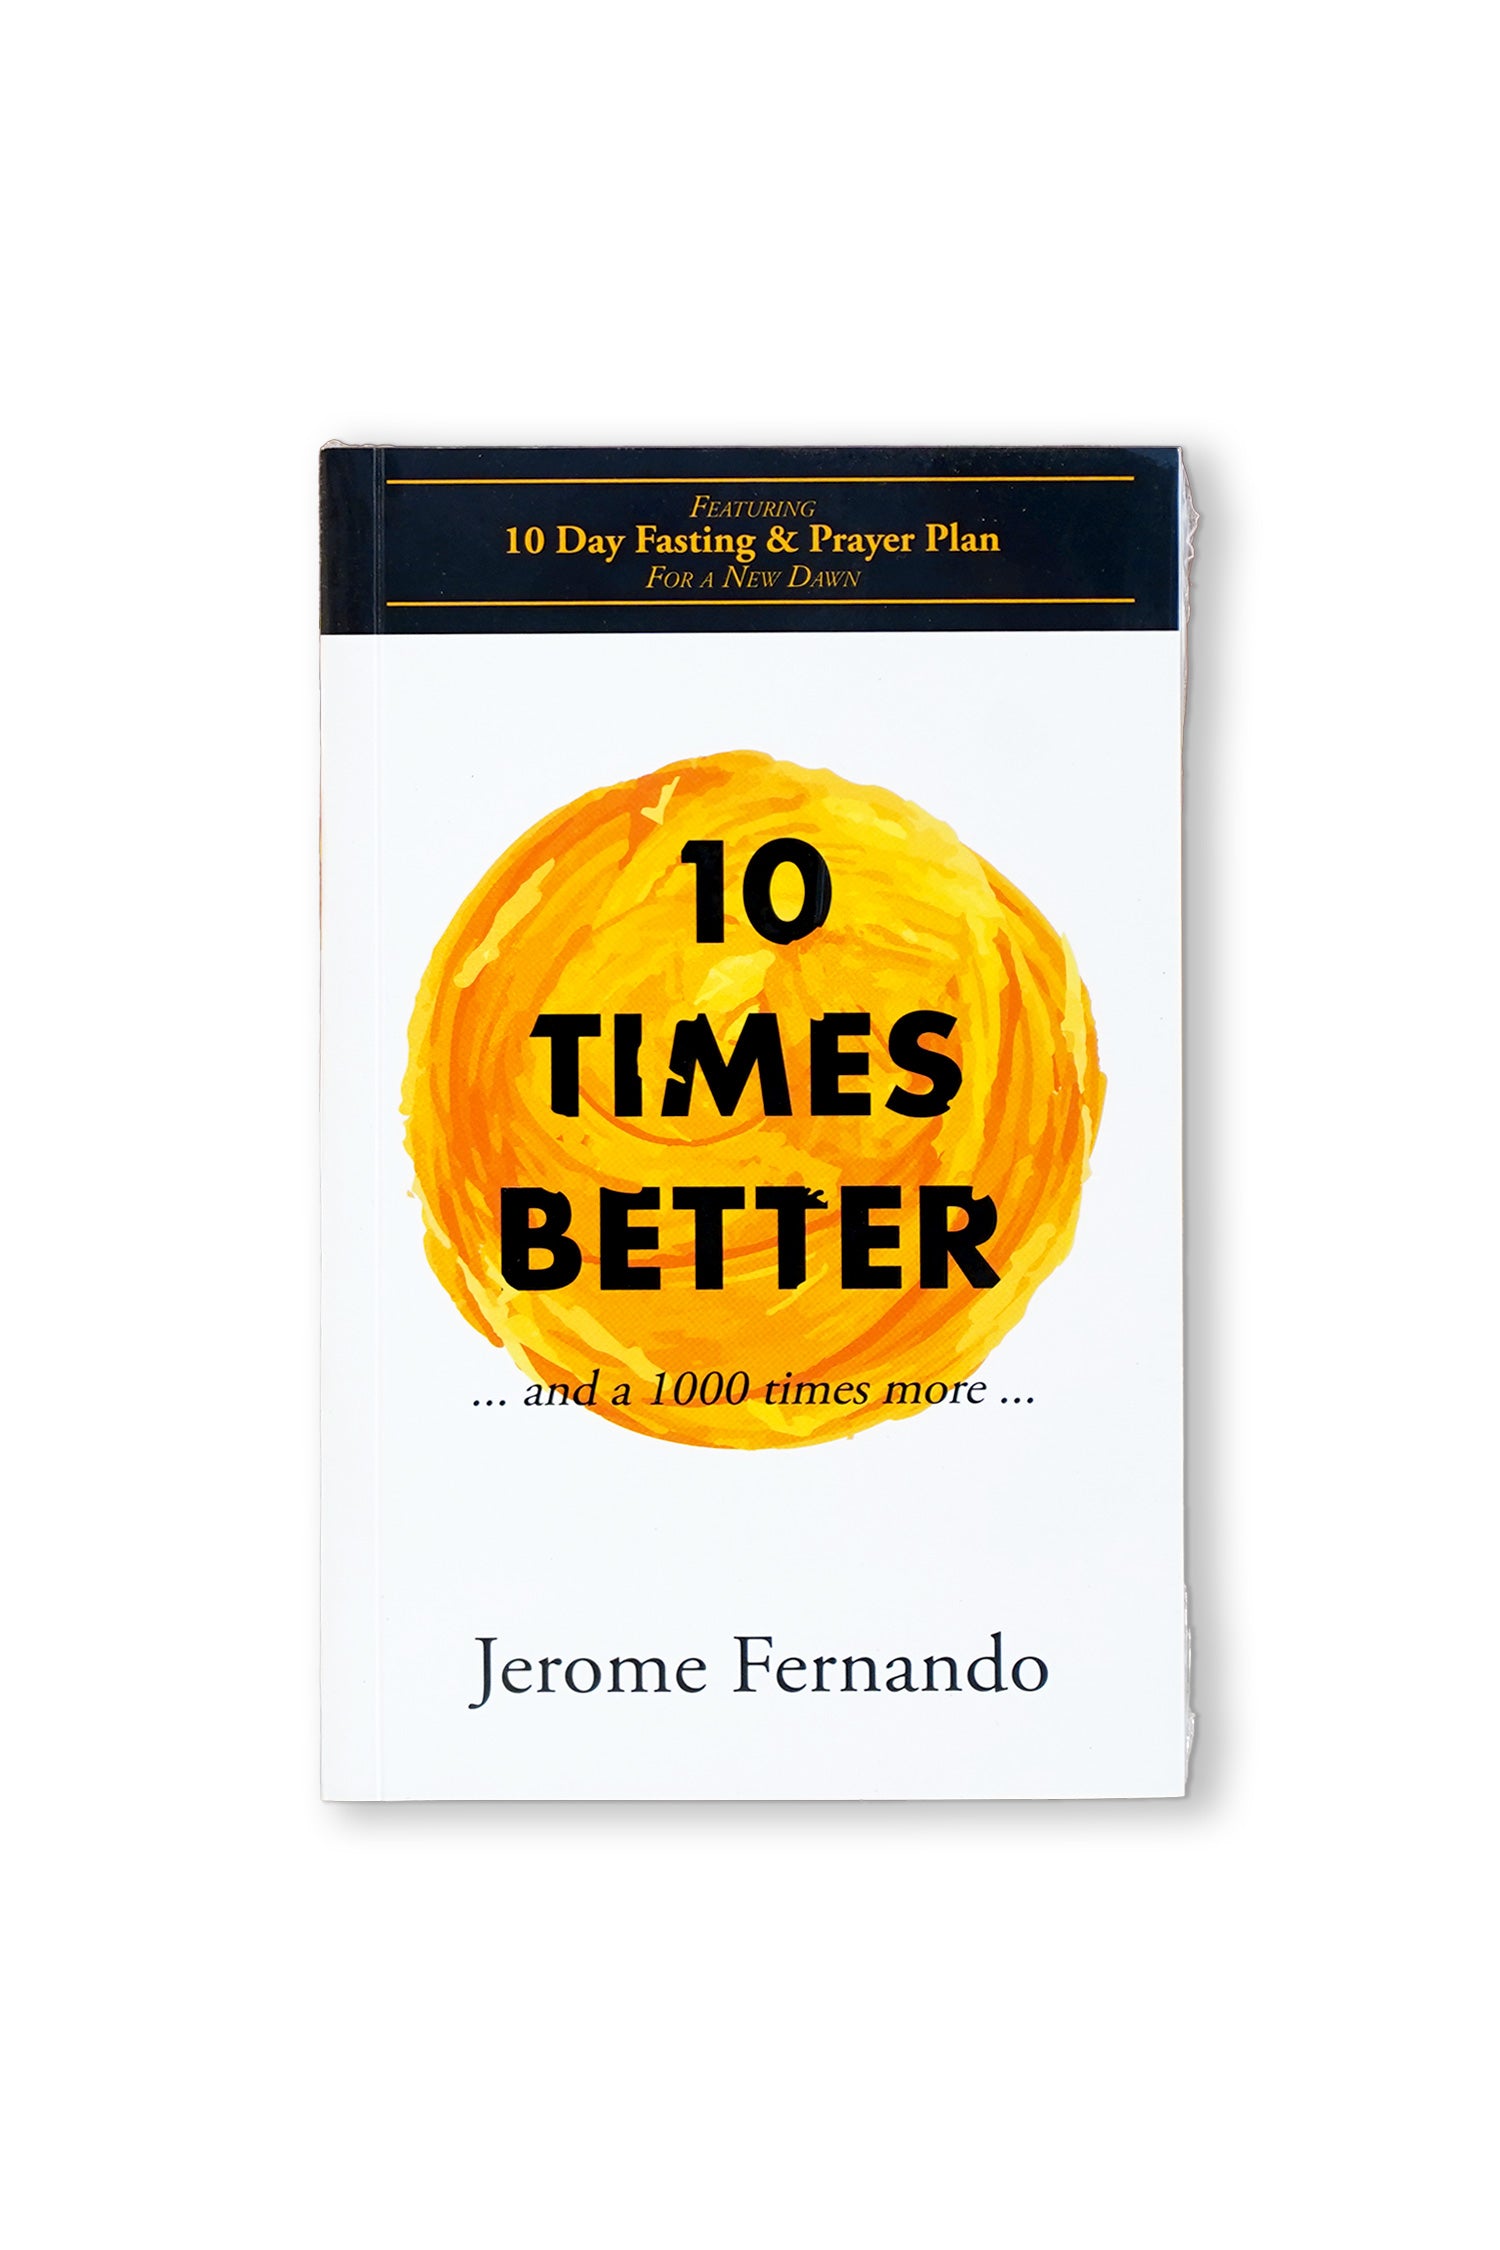 10 Times Better and a 1000 Times More by Jerome Fernando